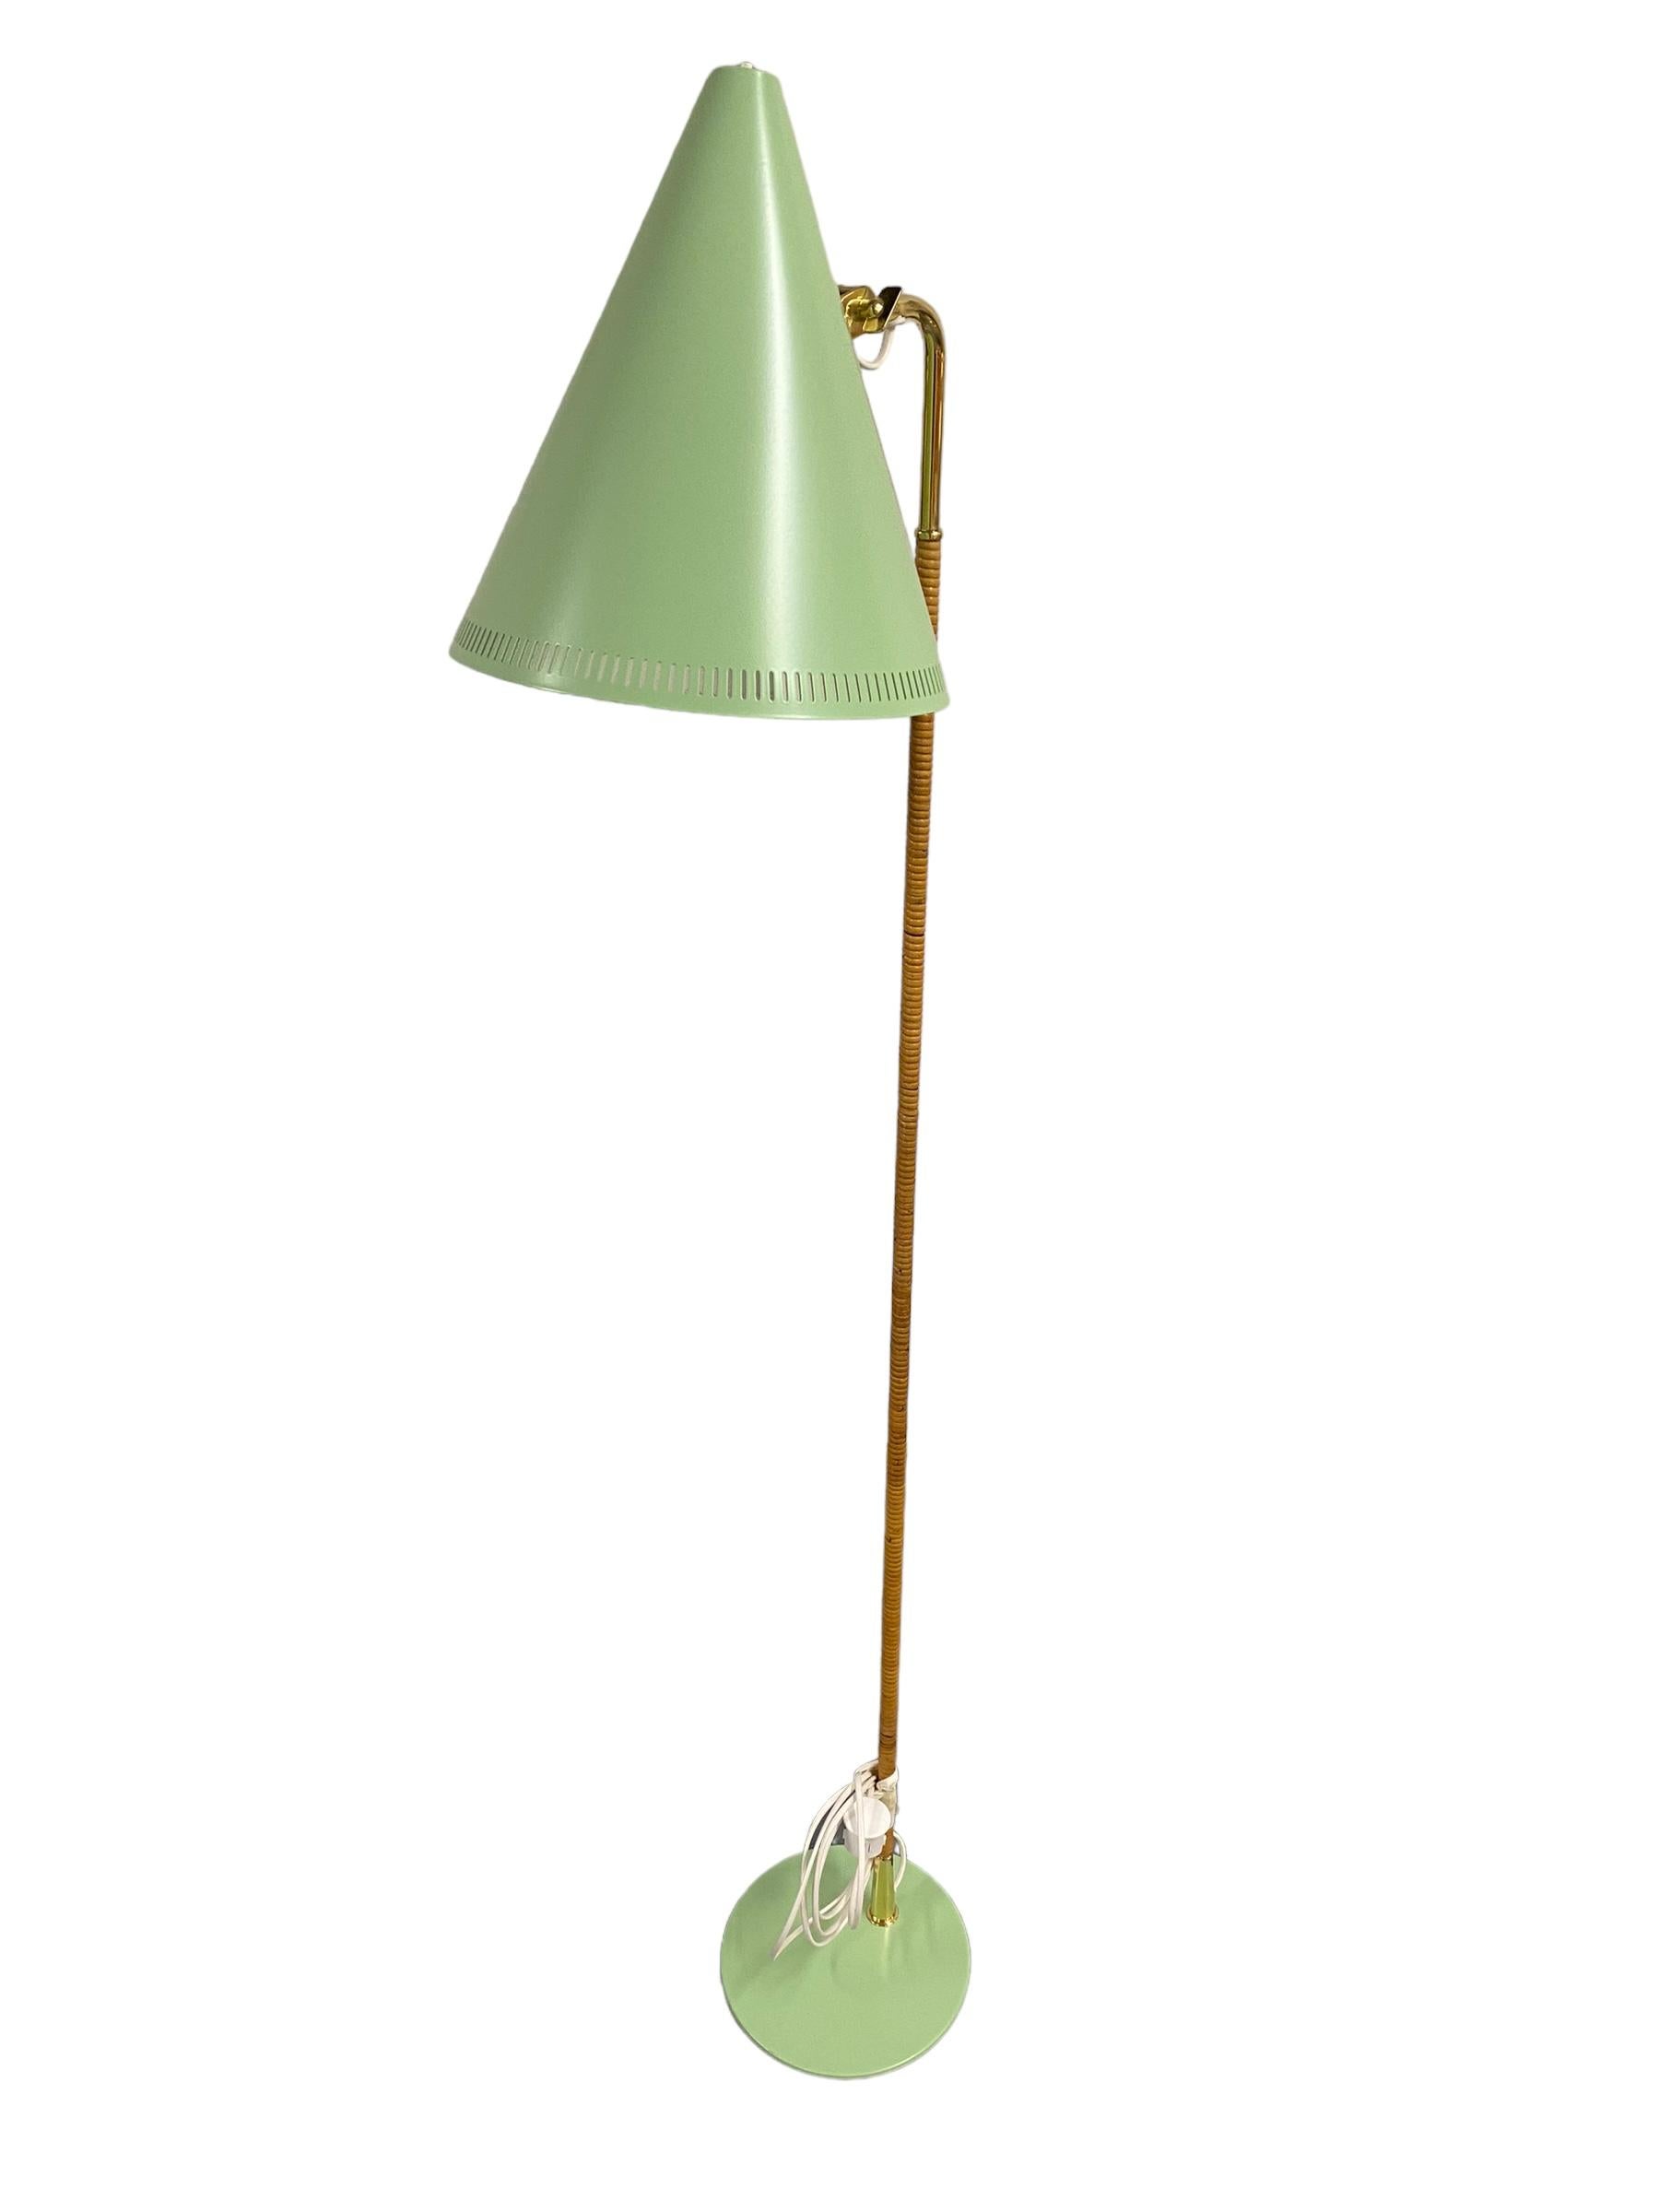 An iconic floor lamp model k10-10 designed by Paavo Tynell for Idman in the 1950s. The lamp has been repainted in mint green, as an alternative for the black and white versions that are the most frequent colours. The item is otherwise in complete